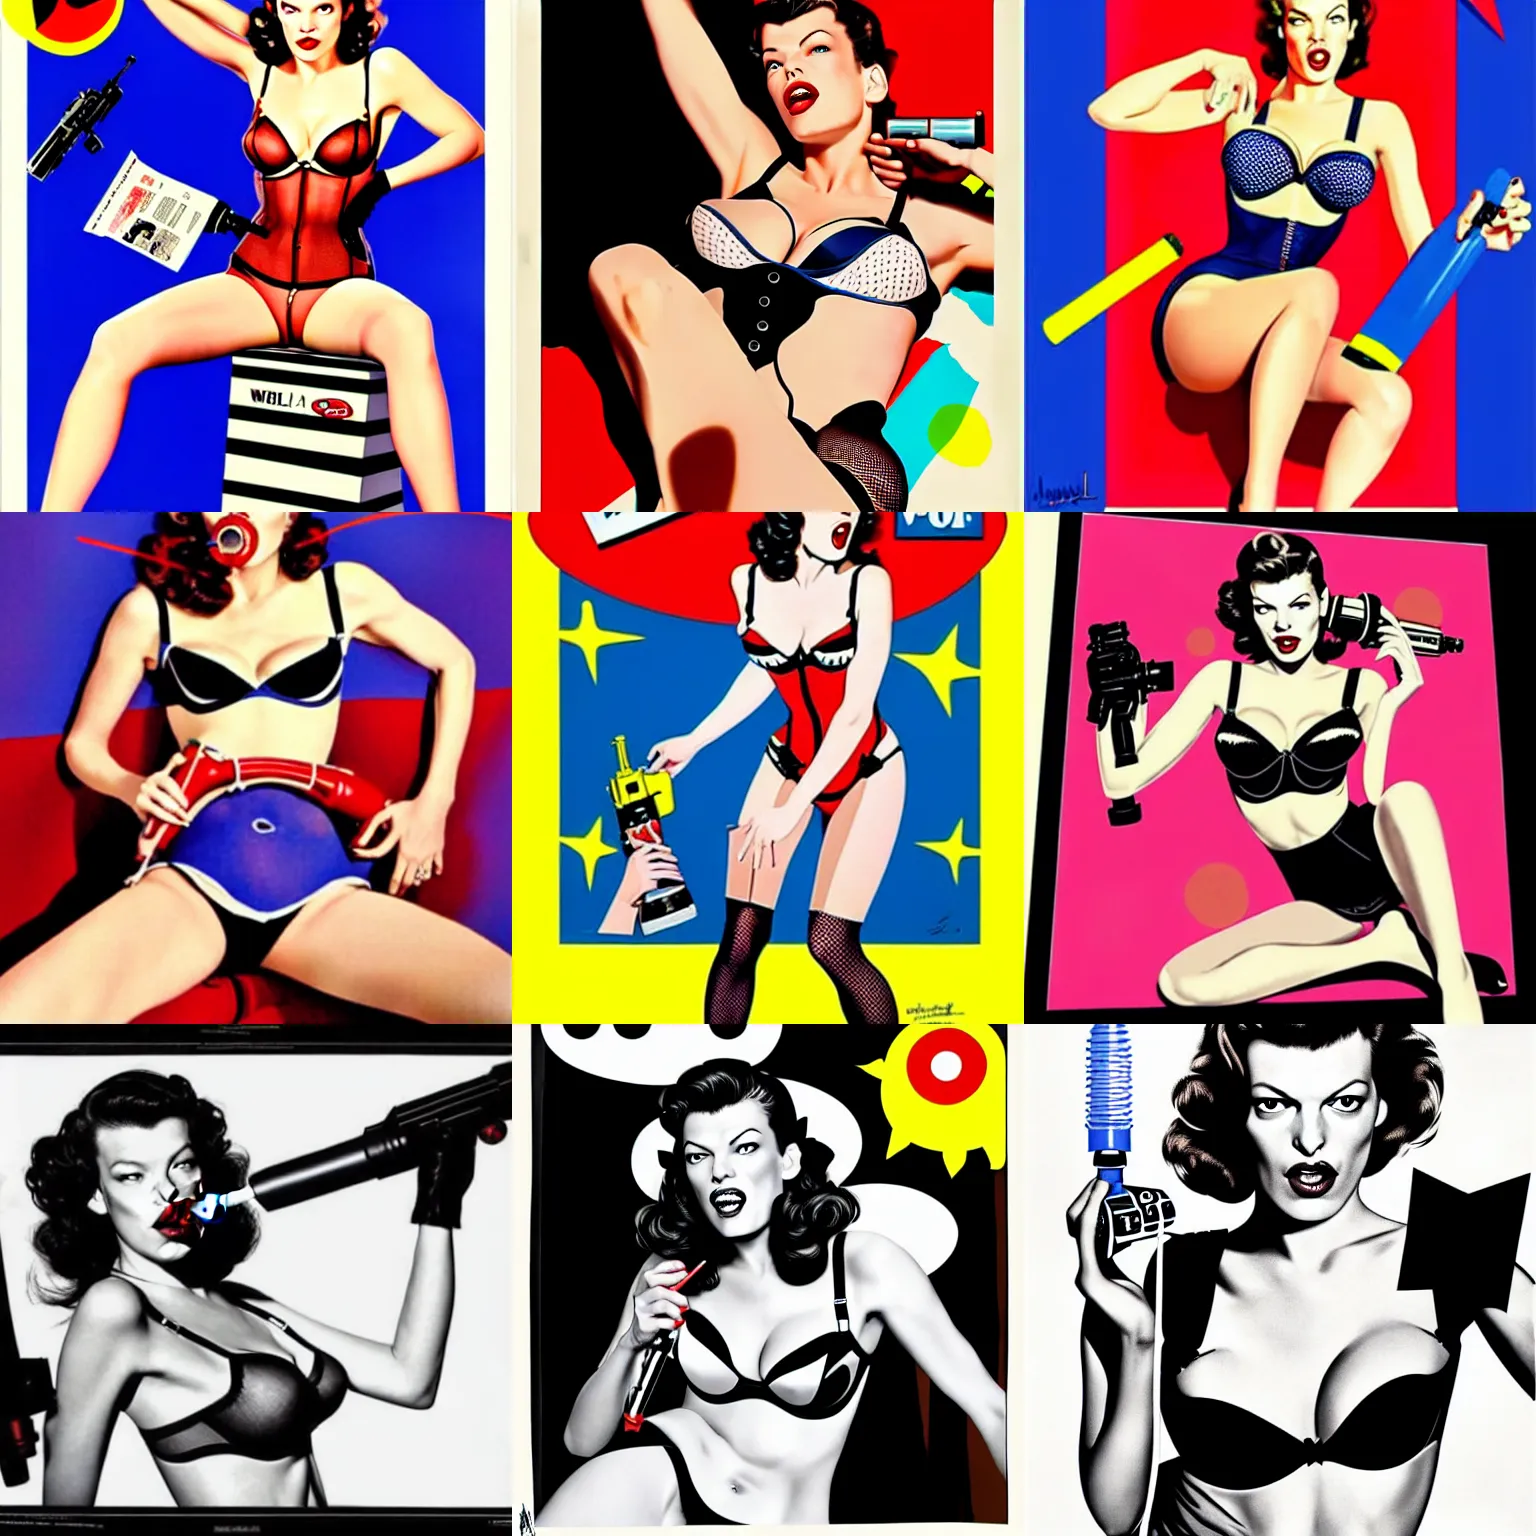 Prompt: mila jovovich in classic pin - up girl pose wearing sexy lingerie holding a ray - gun and blowing a bubble, pop art poster by andy worhol